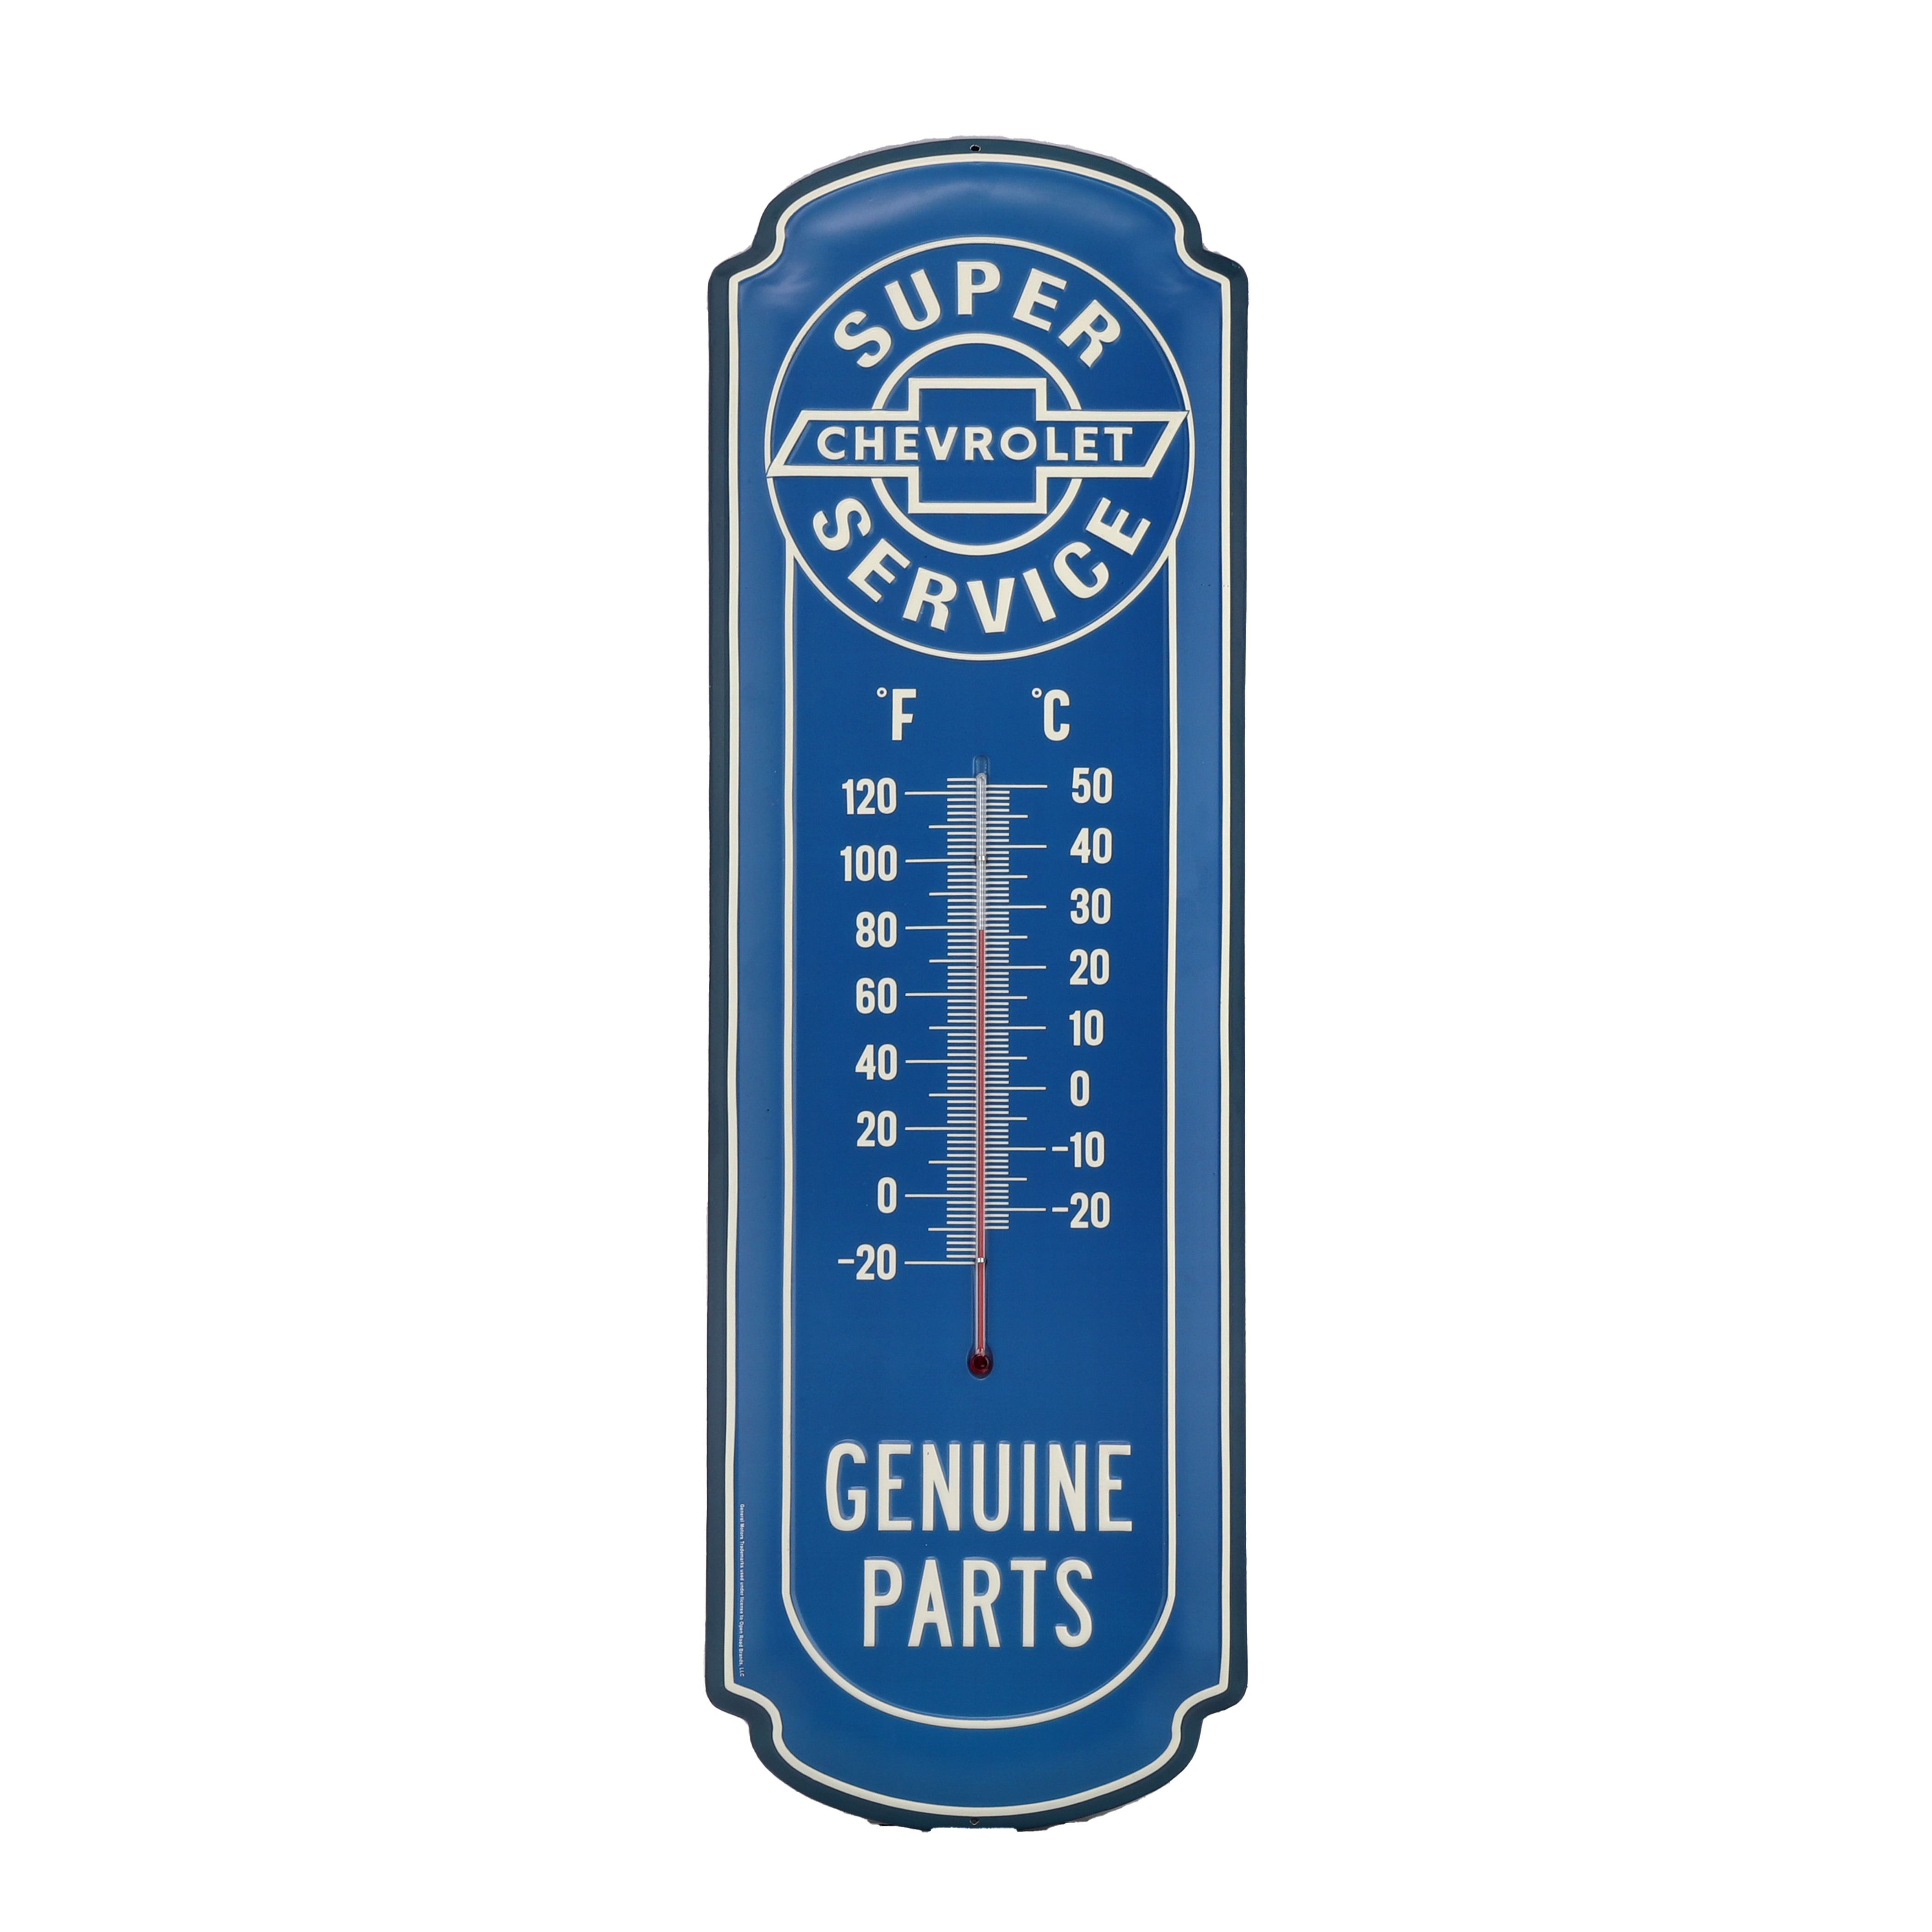 Full Service Garage Metal Wall Thermometer